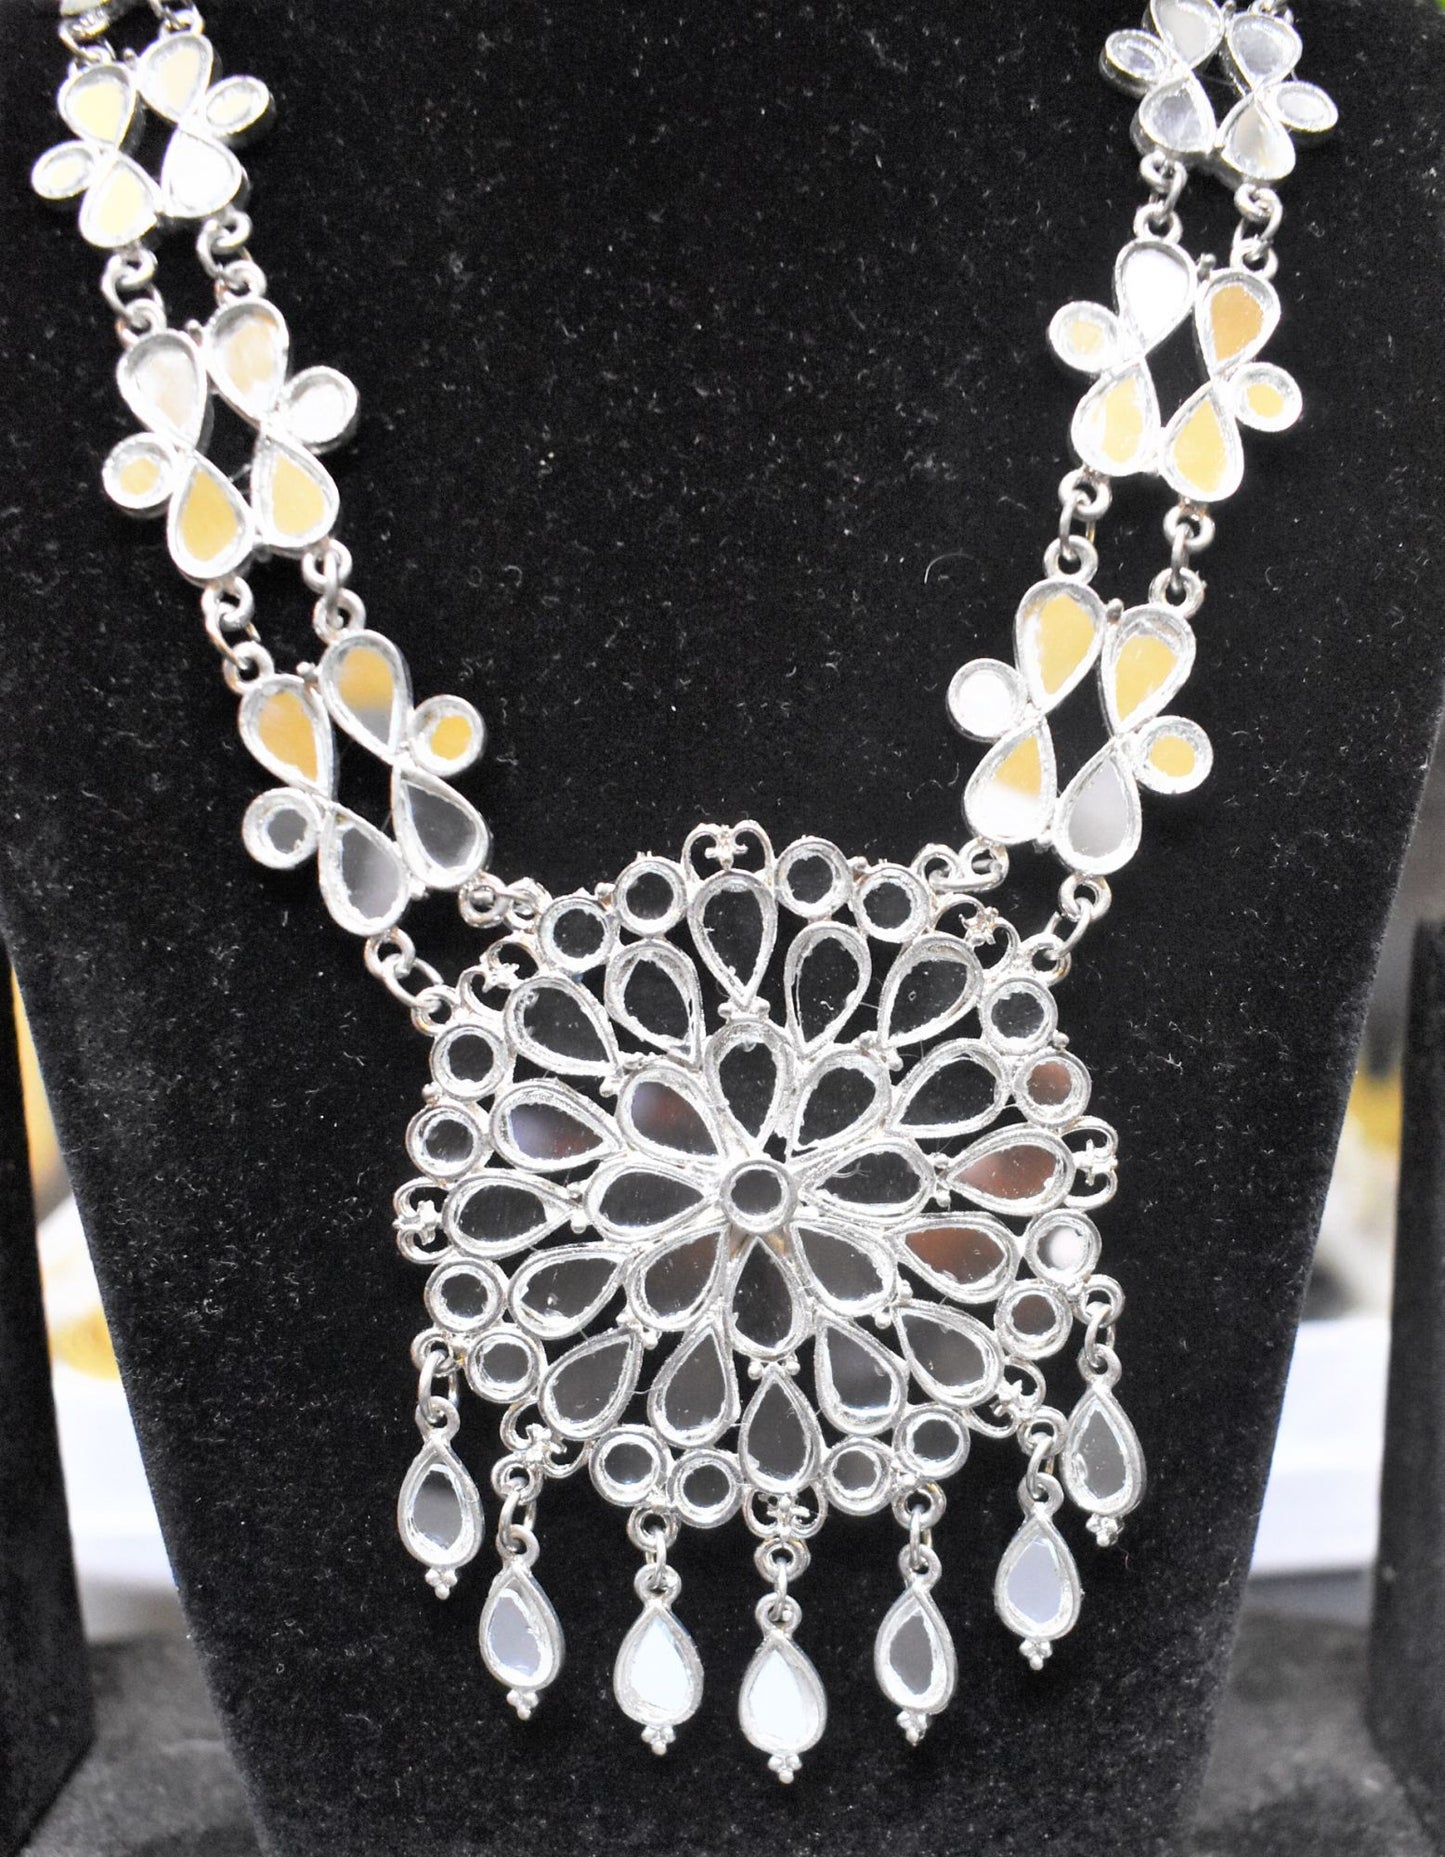 HAND CUT GLASS MIRROR NECKLACE